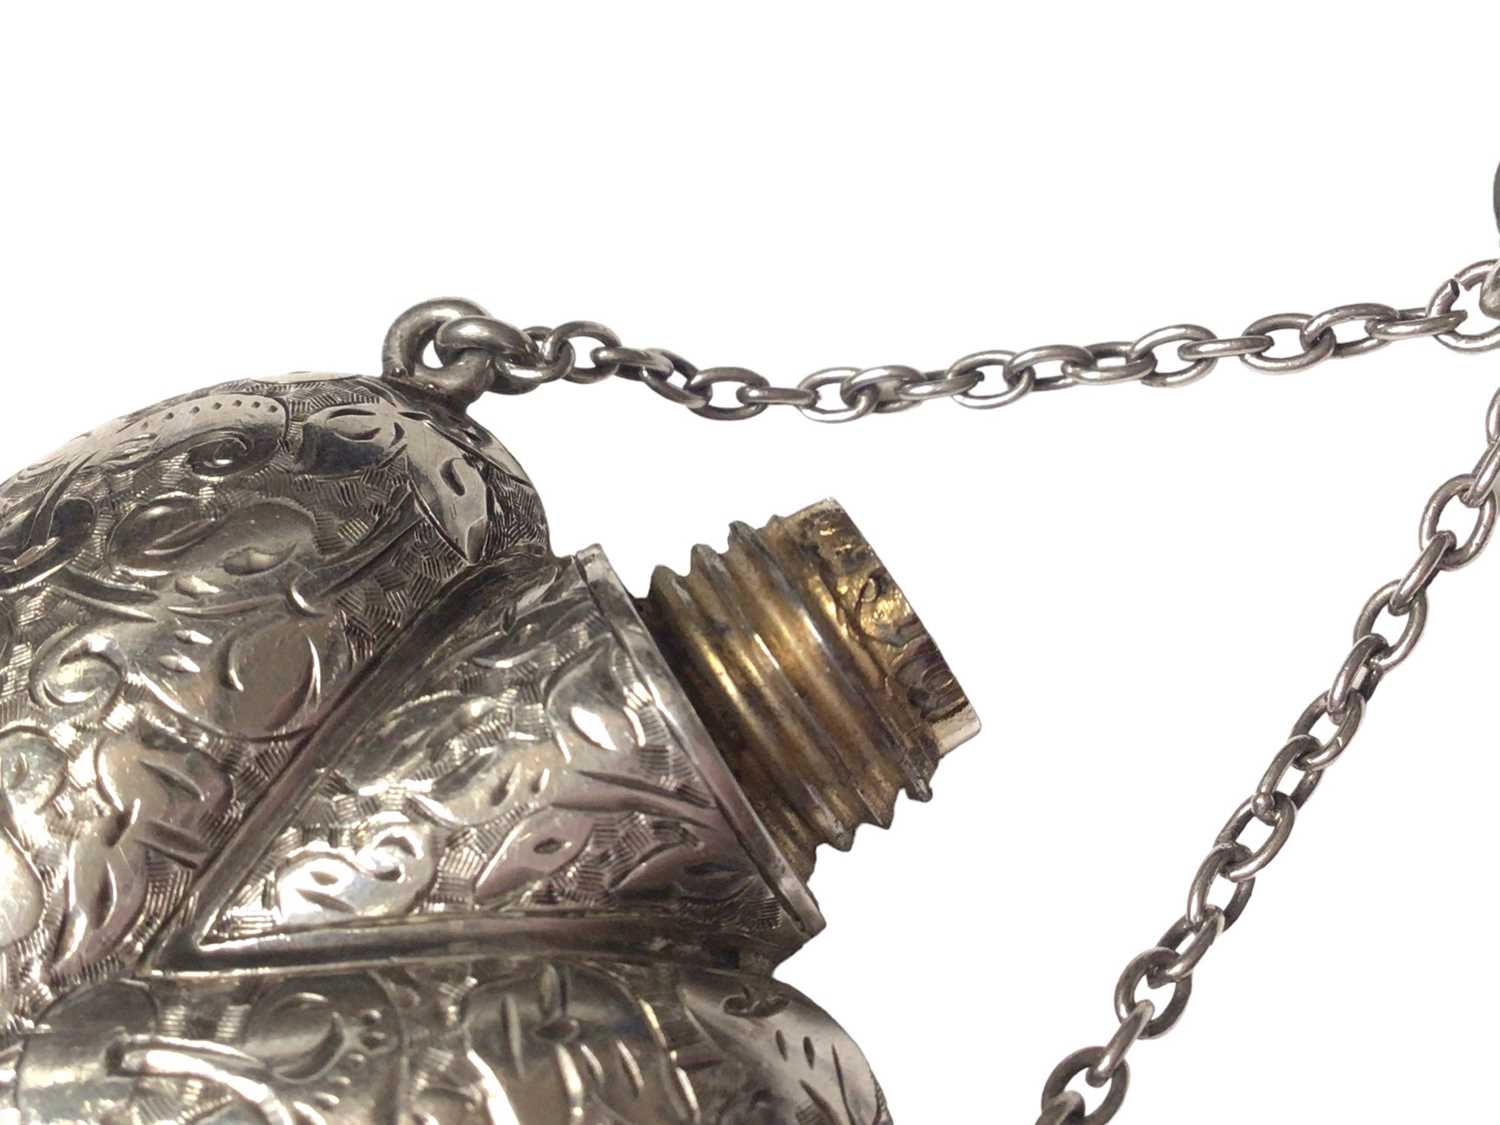 Late Victorian silver heart shaped scent bottle with engraved foliate decoration by Sampson Mordan, - Image 4 of 7